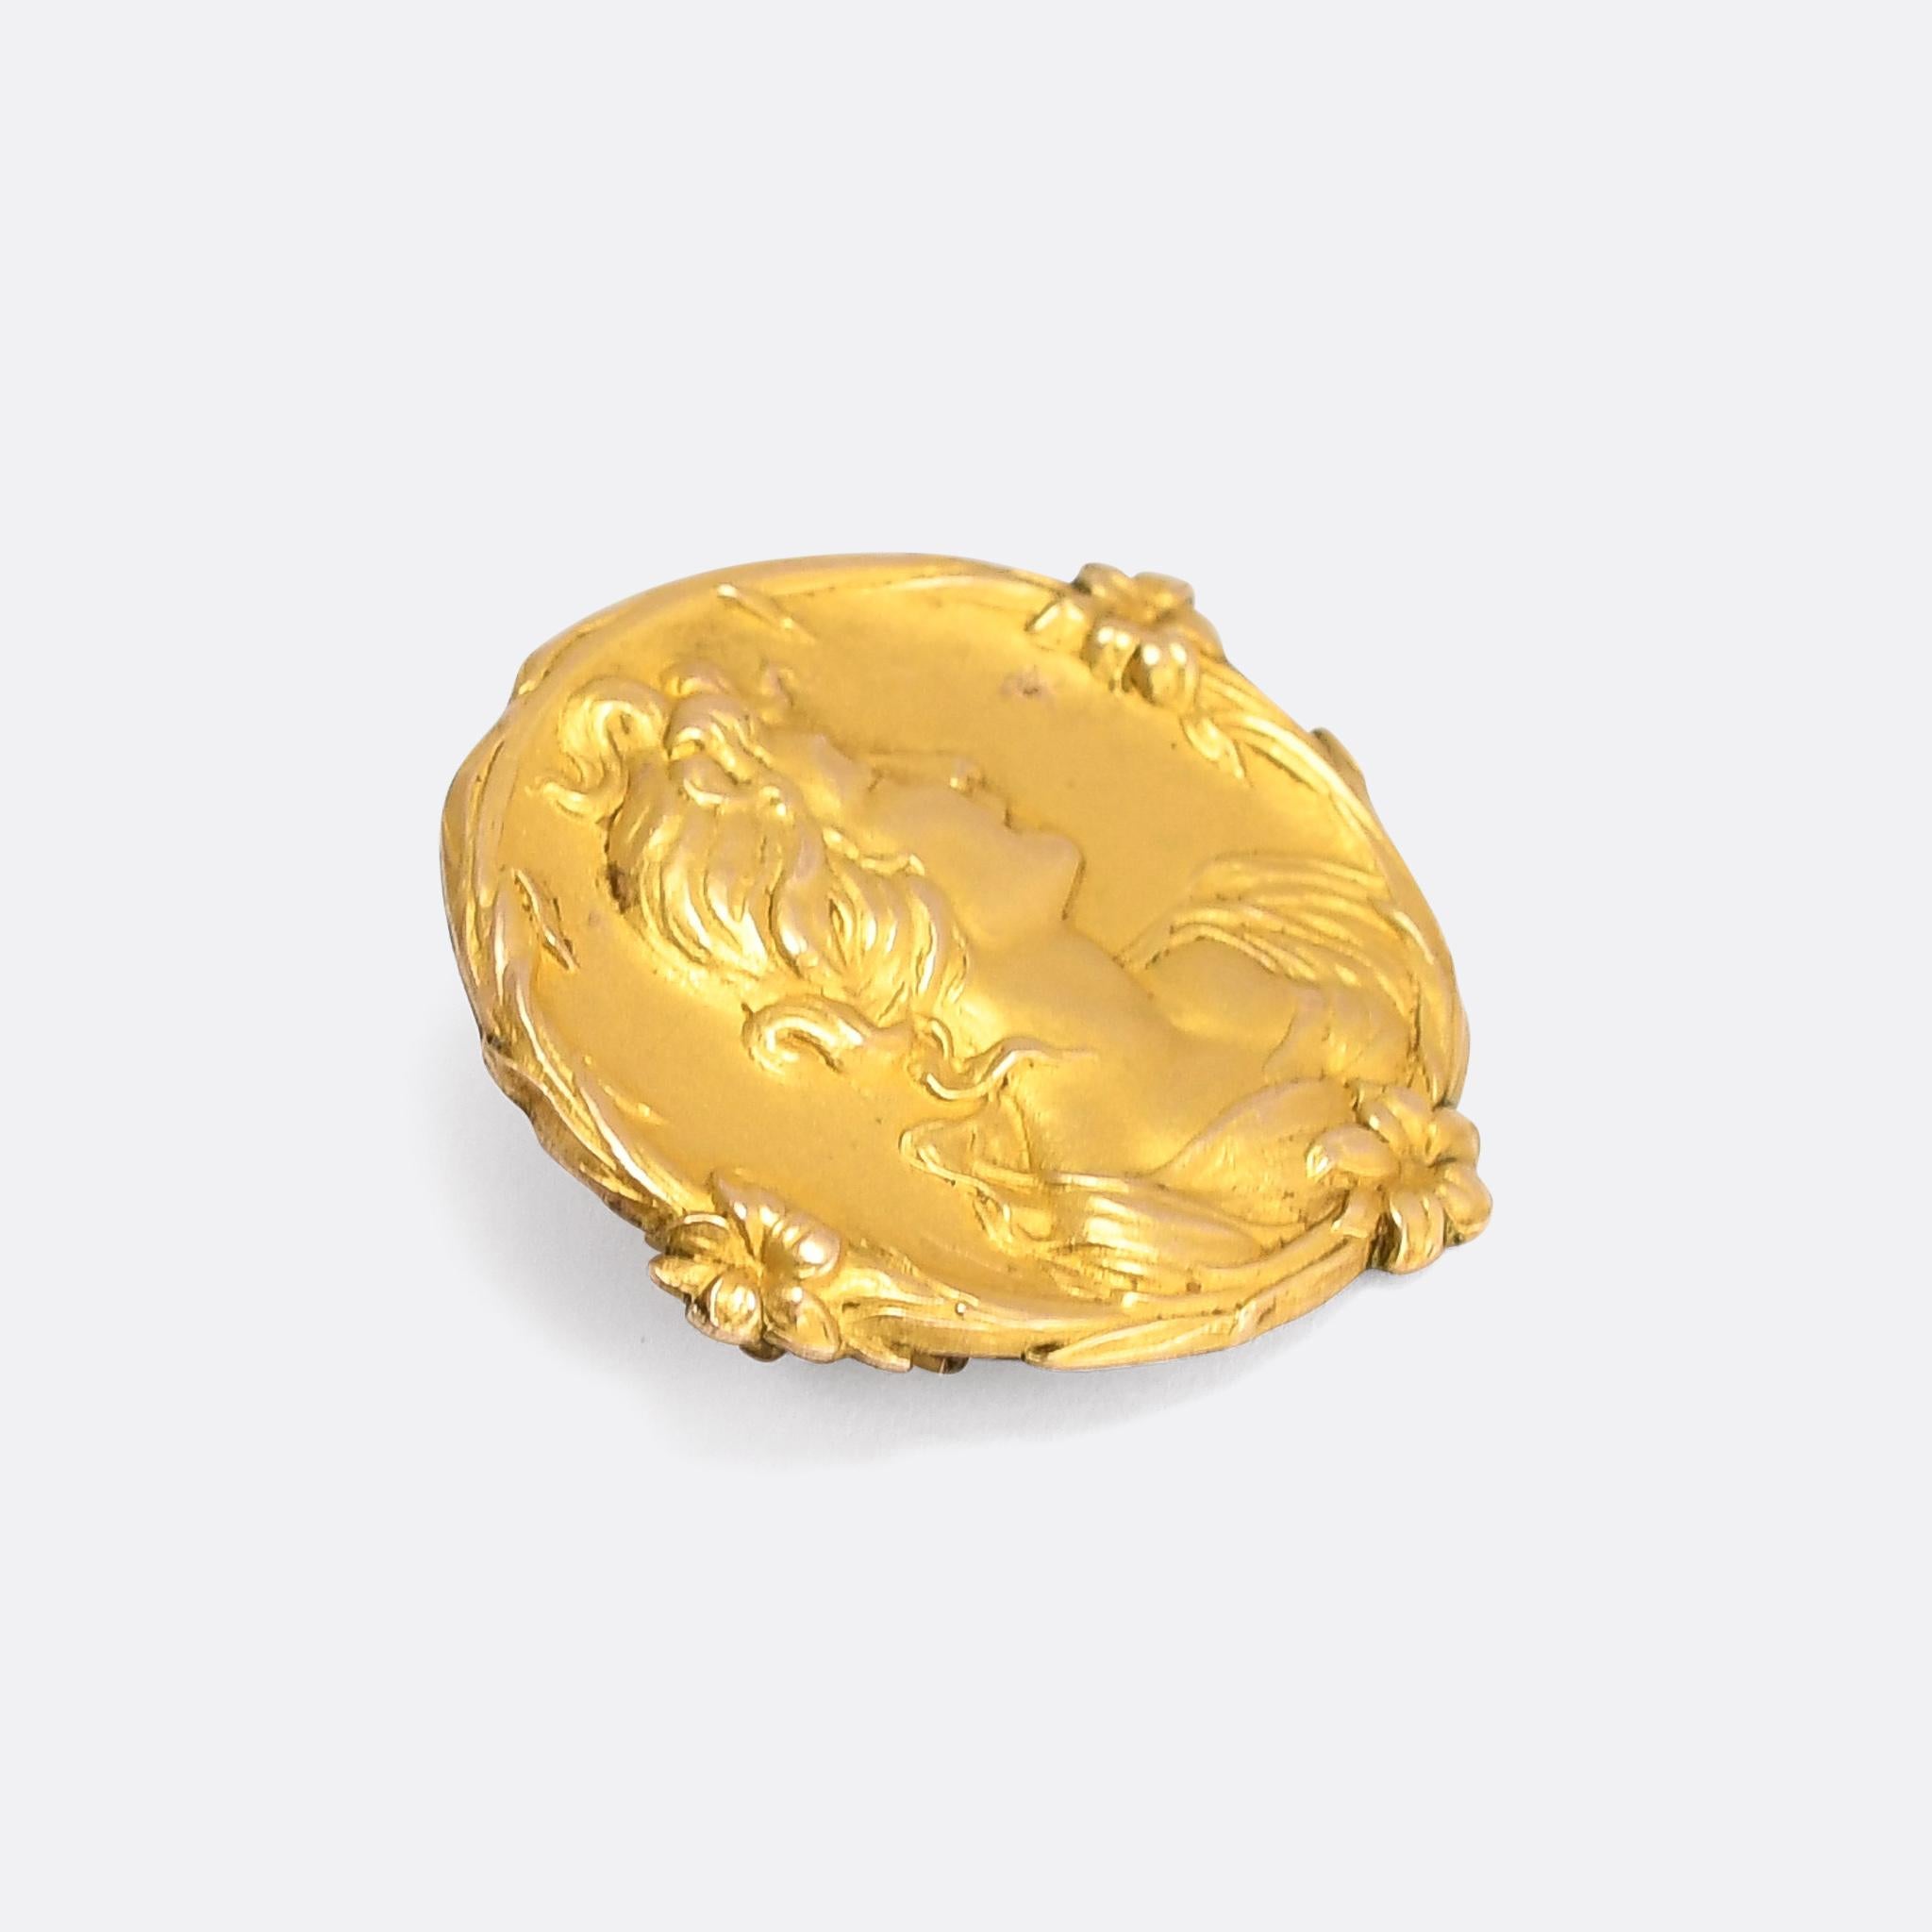 An exquisite Arts & Crafts movement brooch made in England in the turn of the 20th century. The style is unmistakably Pre Rafaelite inspired, featuring a finely detailed floral and foliate border, realistic (if not perhaps a little idealised) hair,